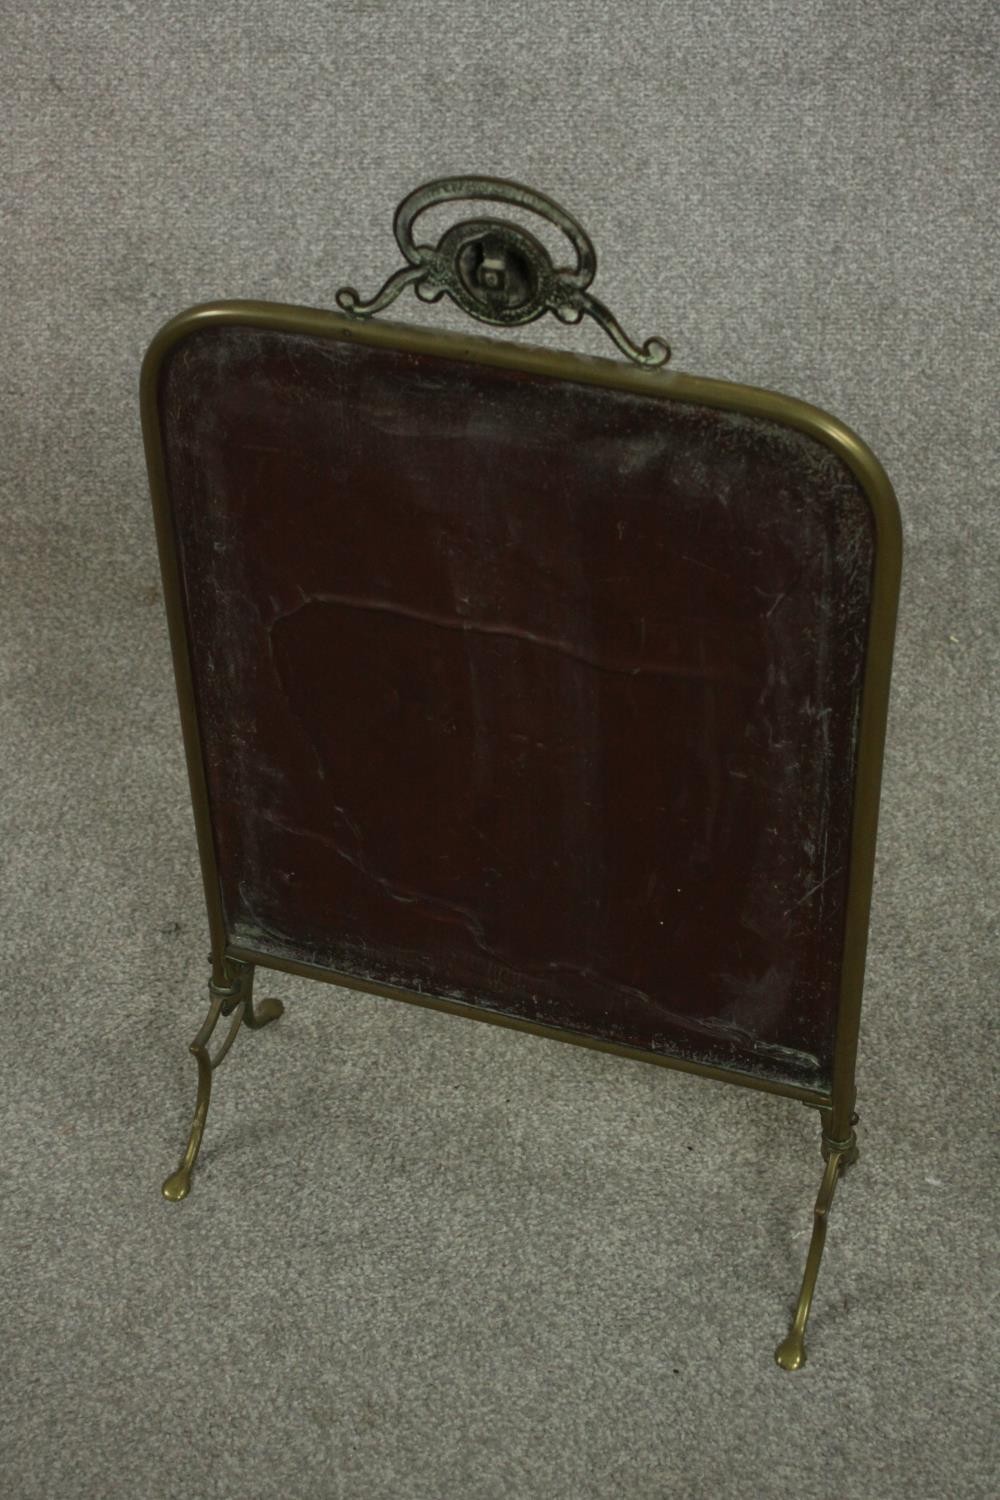 A circa 1900 brass mirrored fire screen, with engraved foliate design to the centre of the mirror - Image 5 of 5